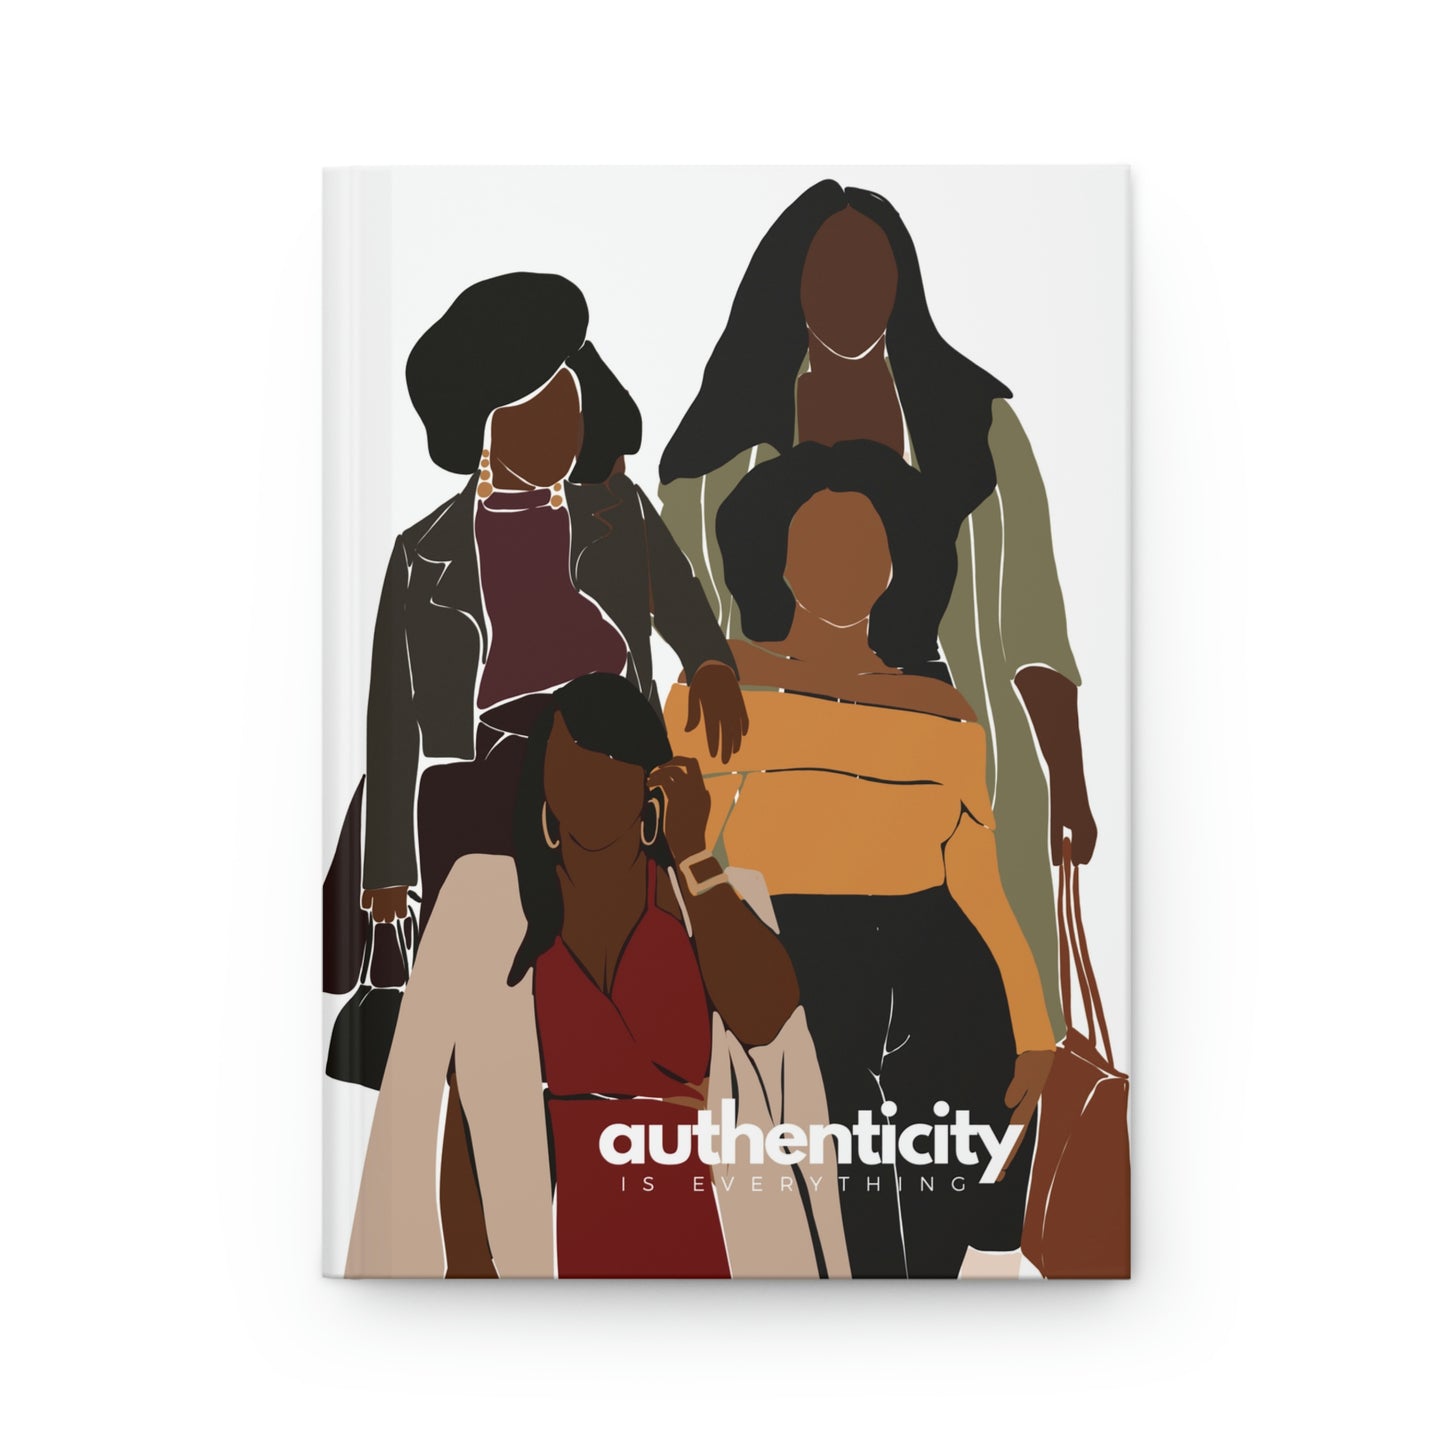 "authenticity is everything" Velvety Matte Hardcover Journal